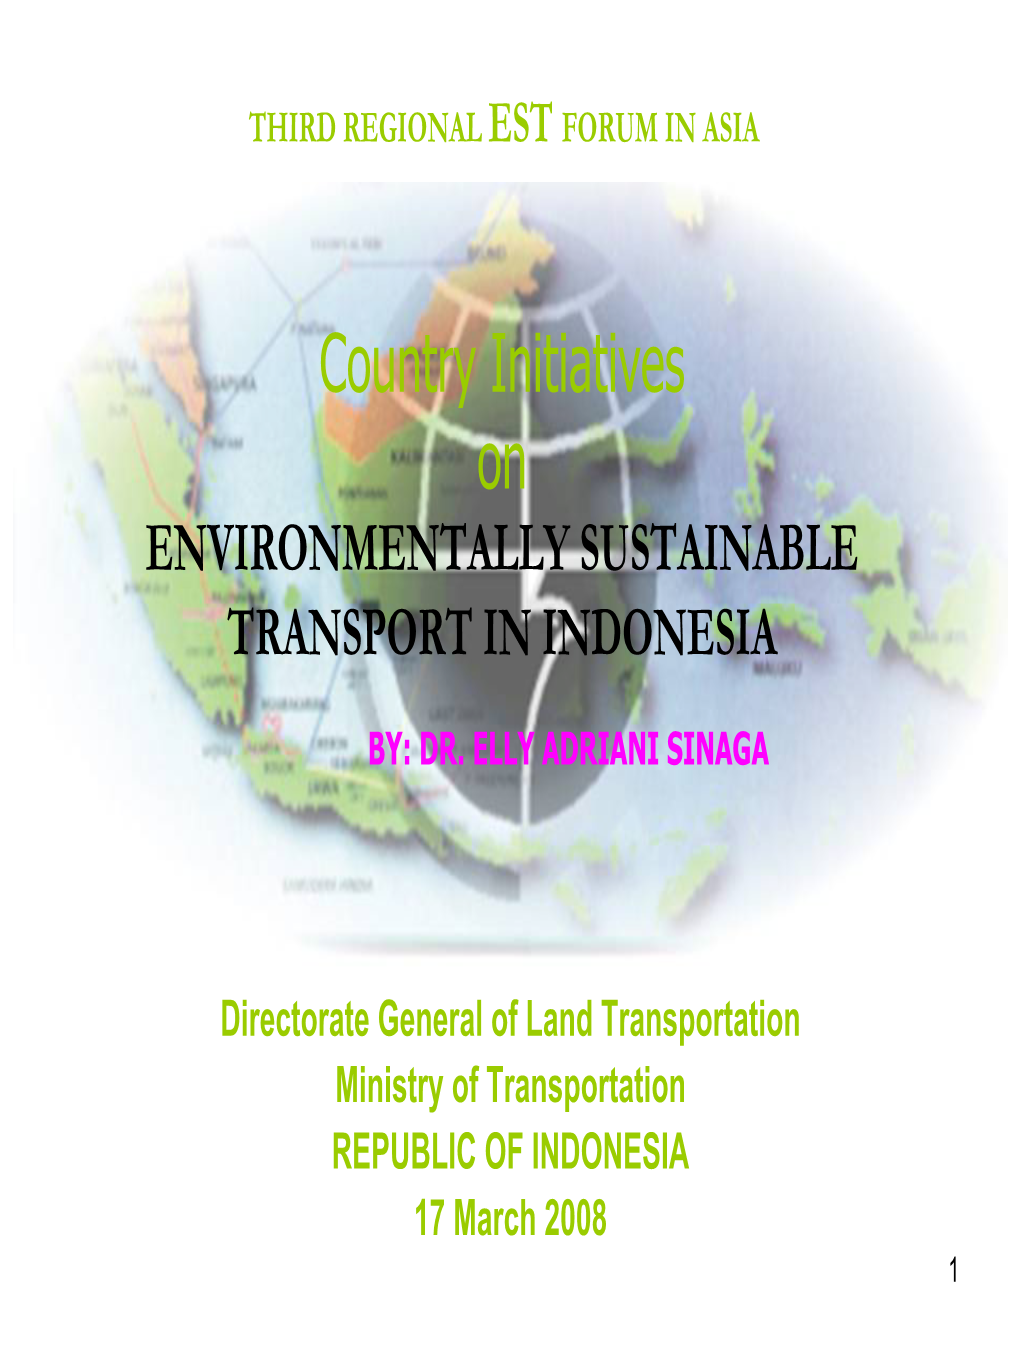 Country Initiatives on ENVIRONMENTALLY SUSTAINABLE TRANSPORT in INDONESIA